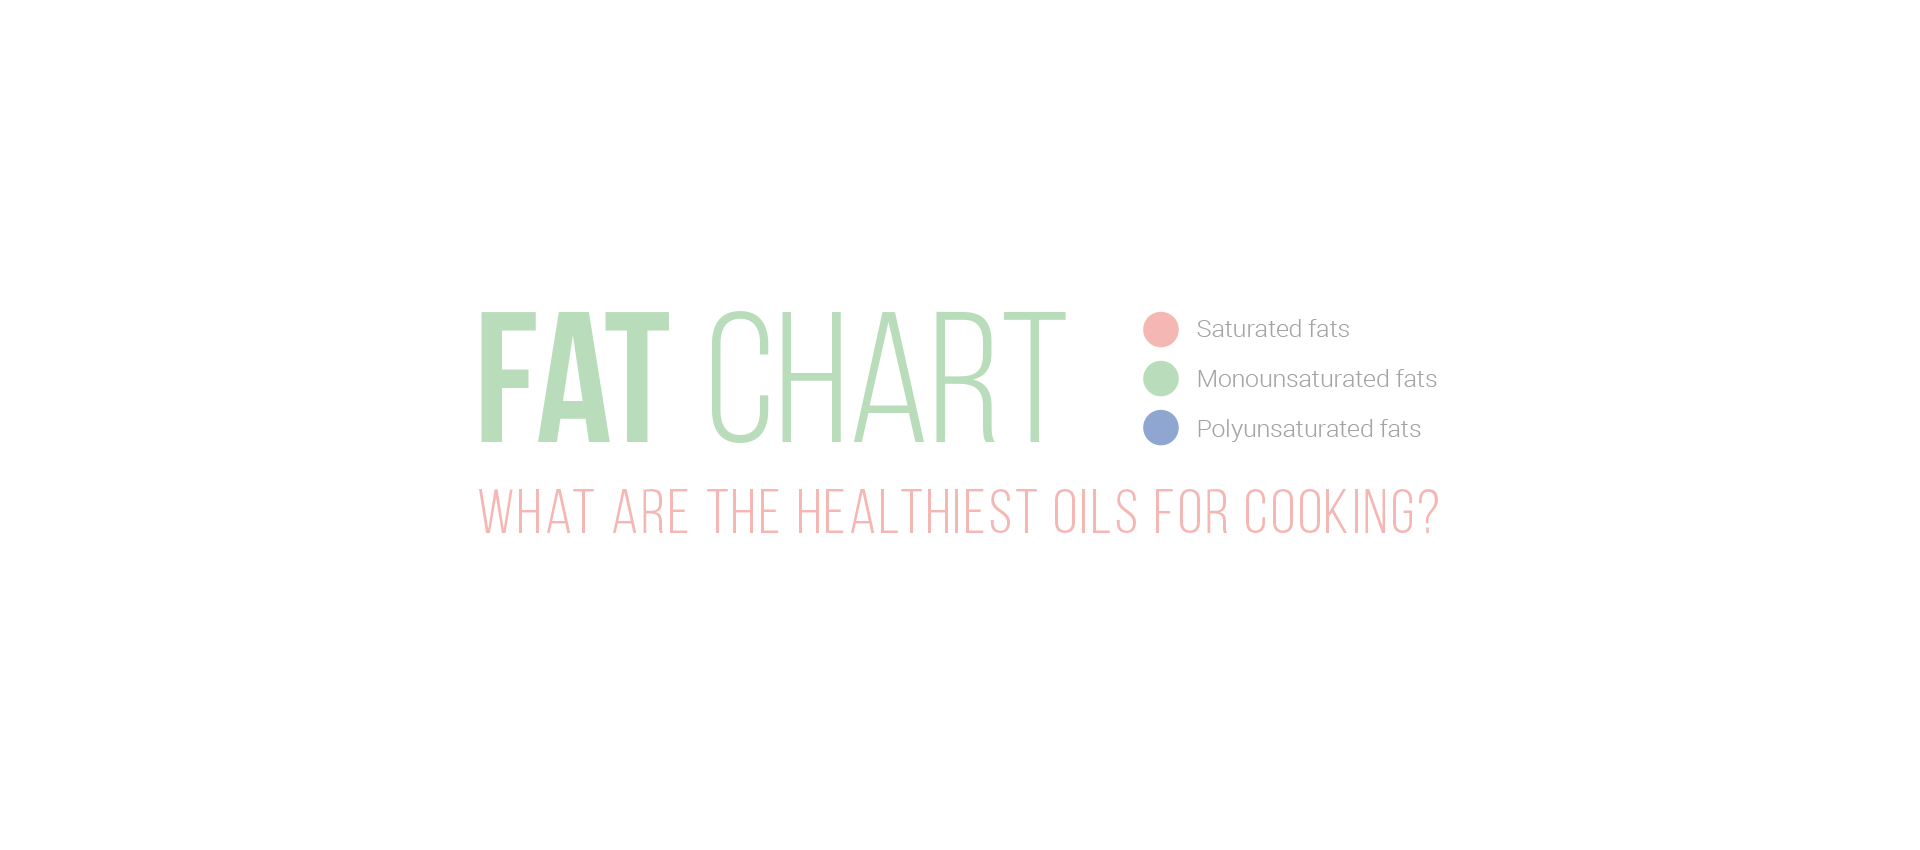 What makes a cooking oil (un)healthy?